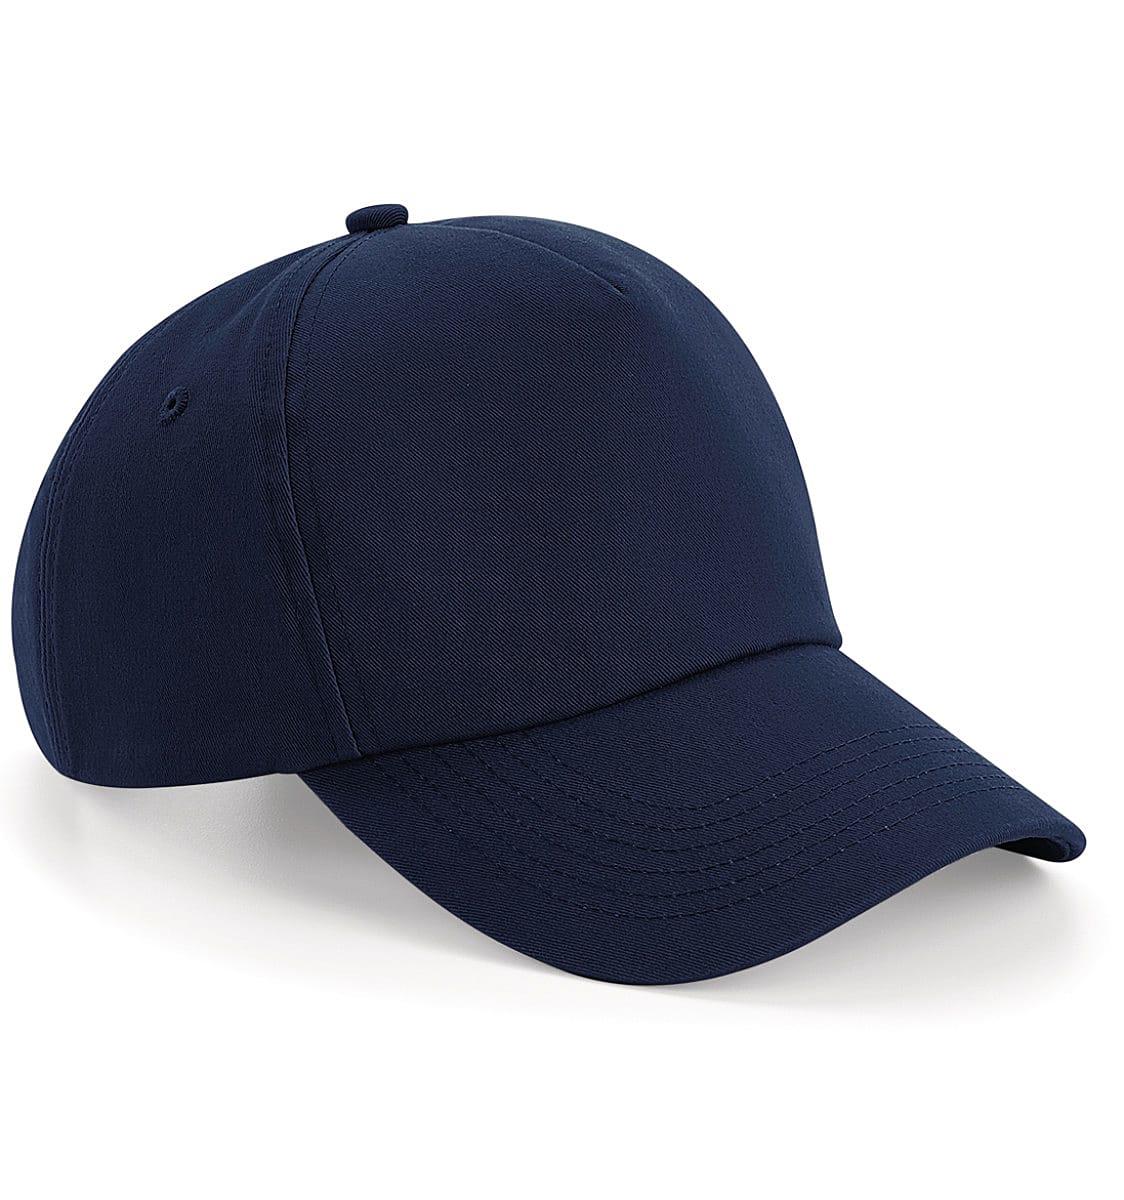 Beechfield Authentic 5 Panel Cap in French Navy (Product Code: B25)